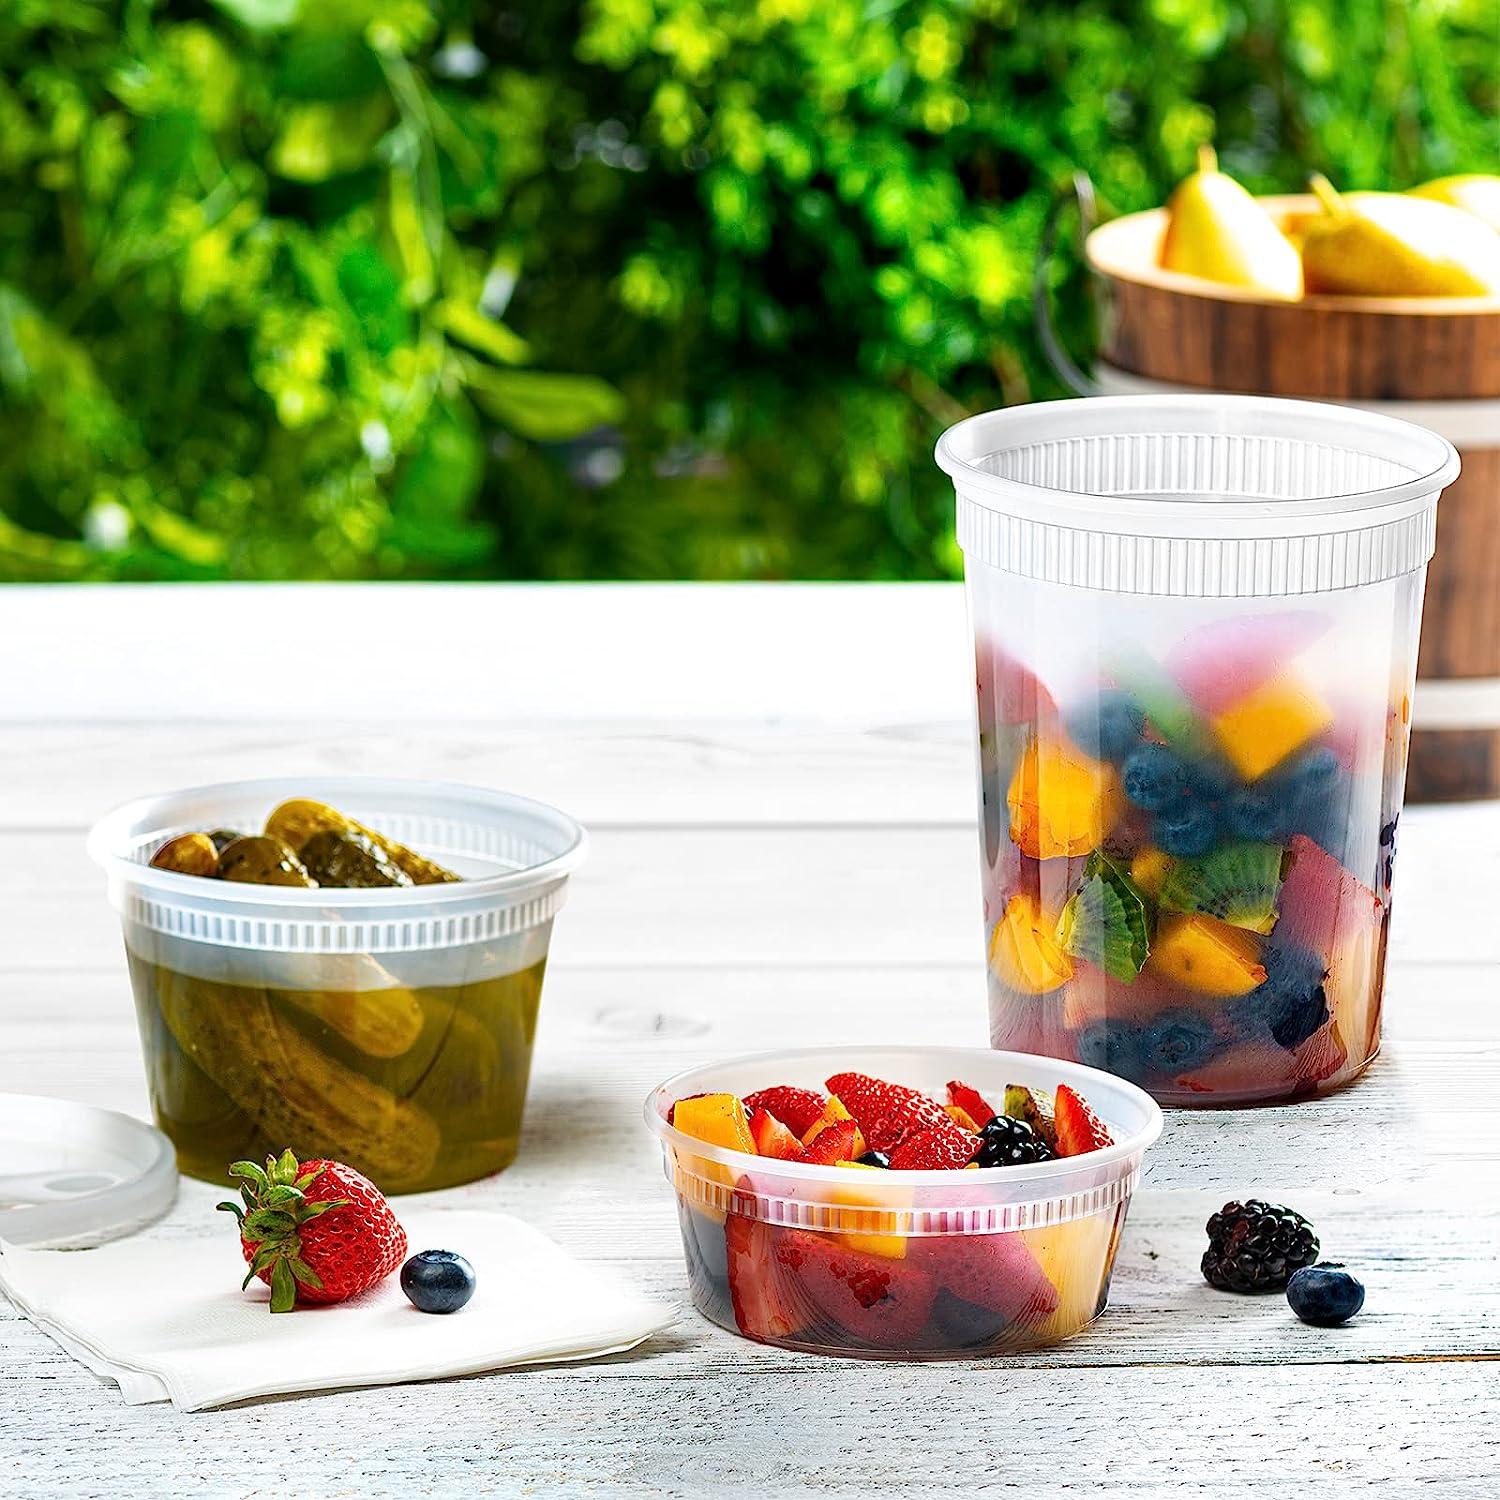 Plastic containers and lids